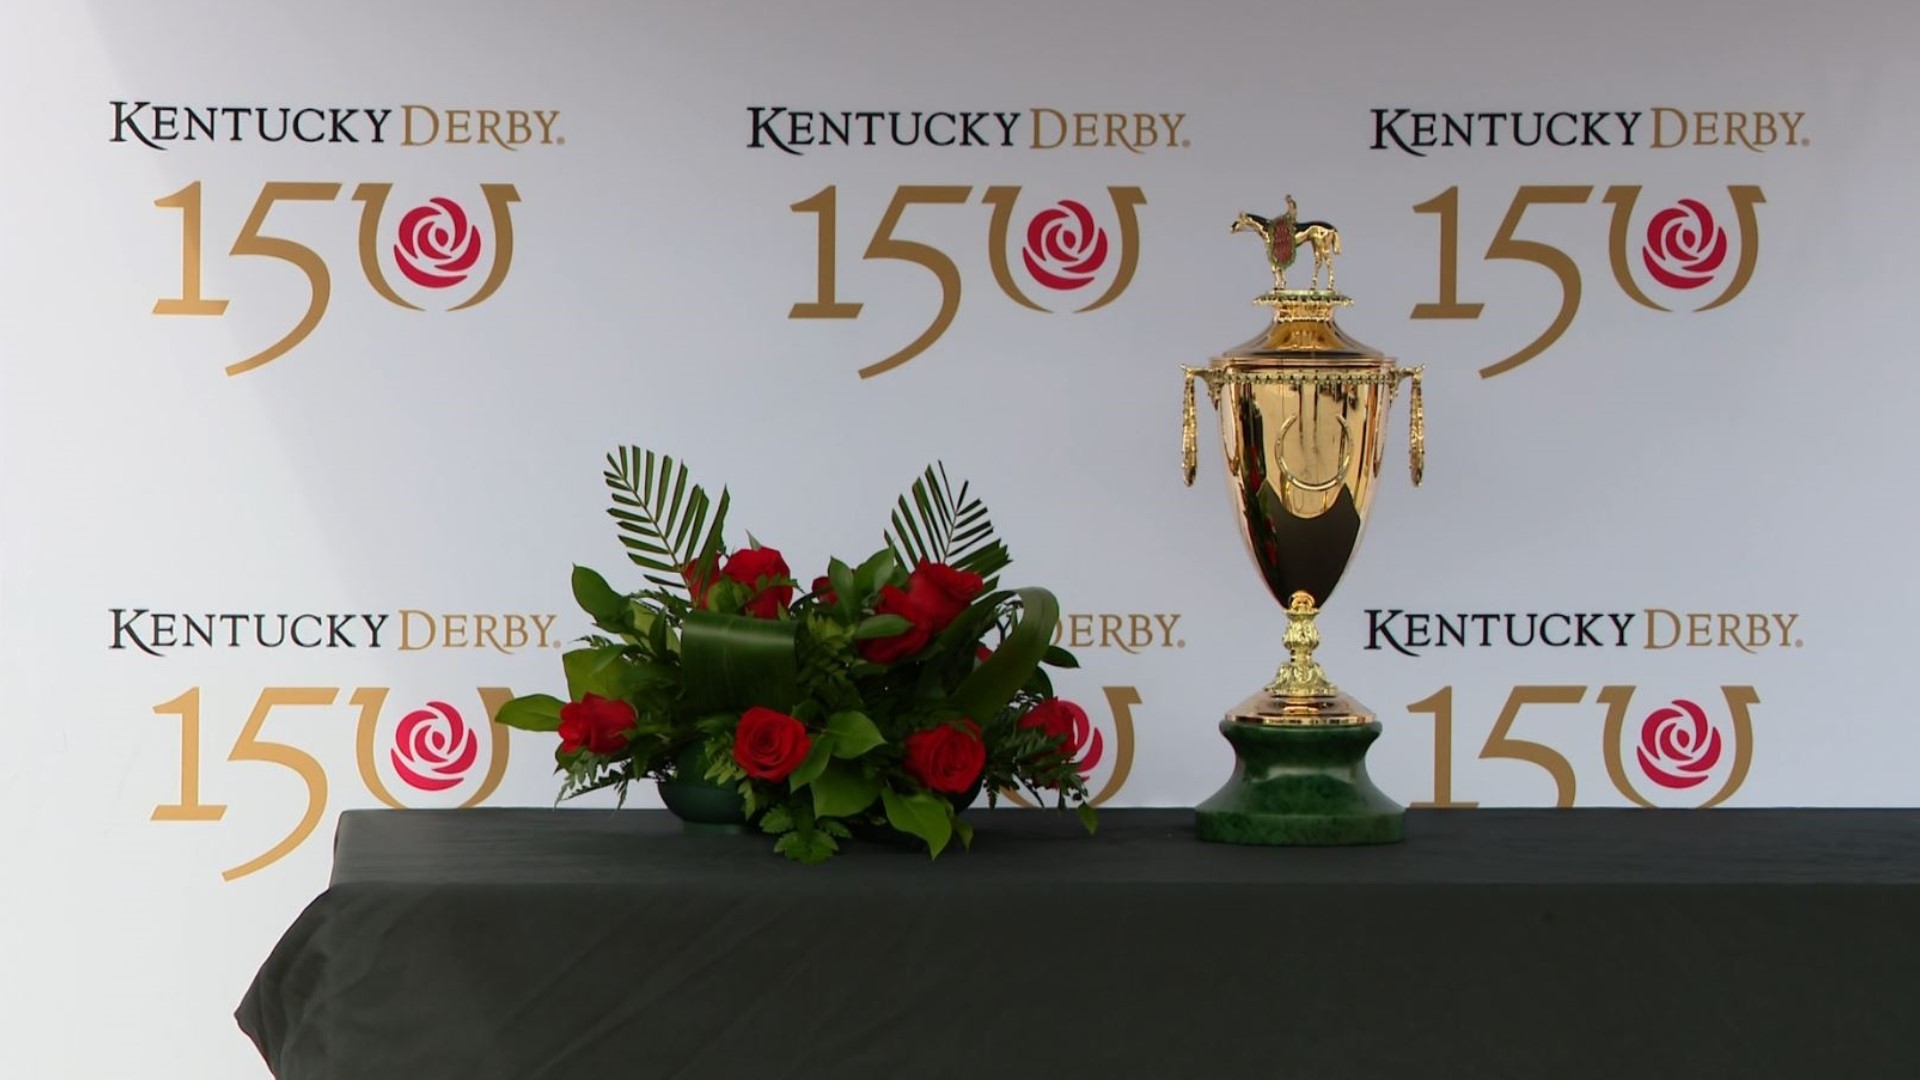 Headed to the track on Derby Day? Here's a brief schedule of what the day will look like.